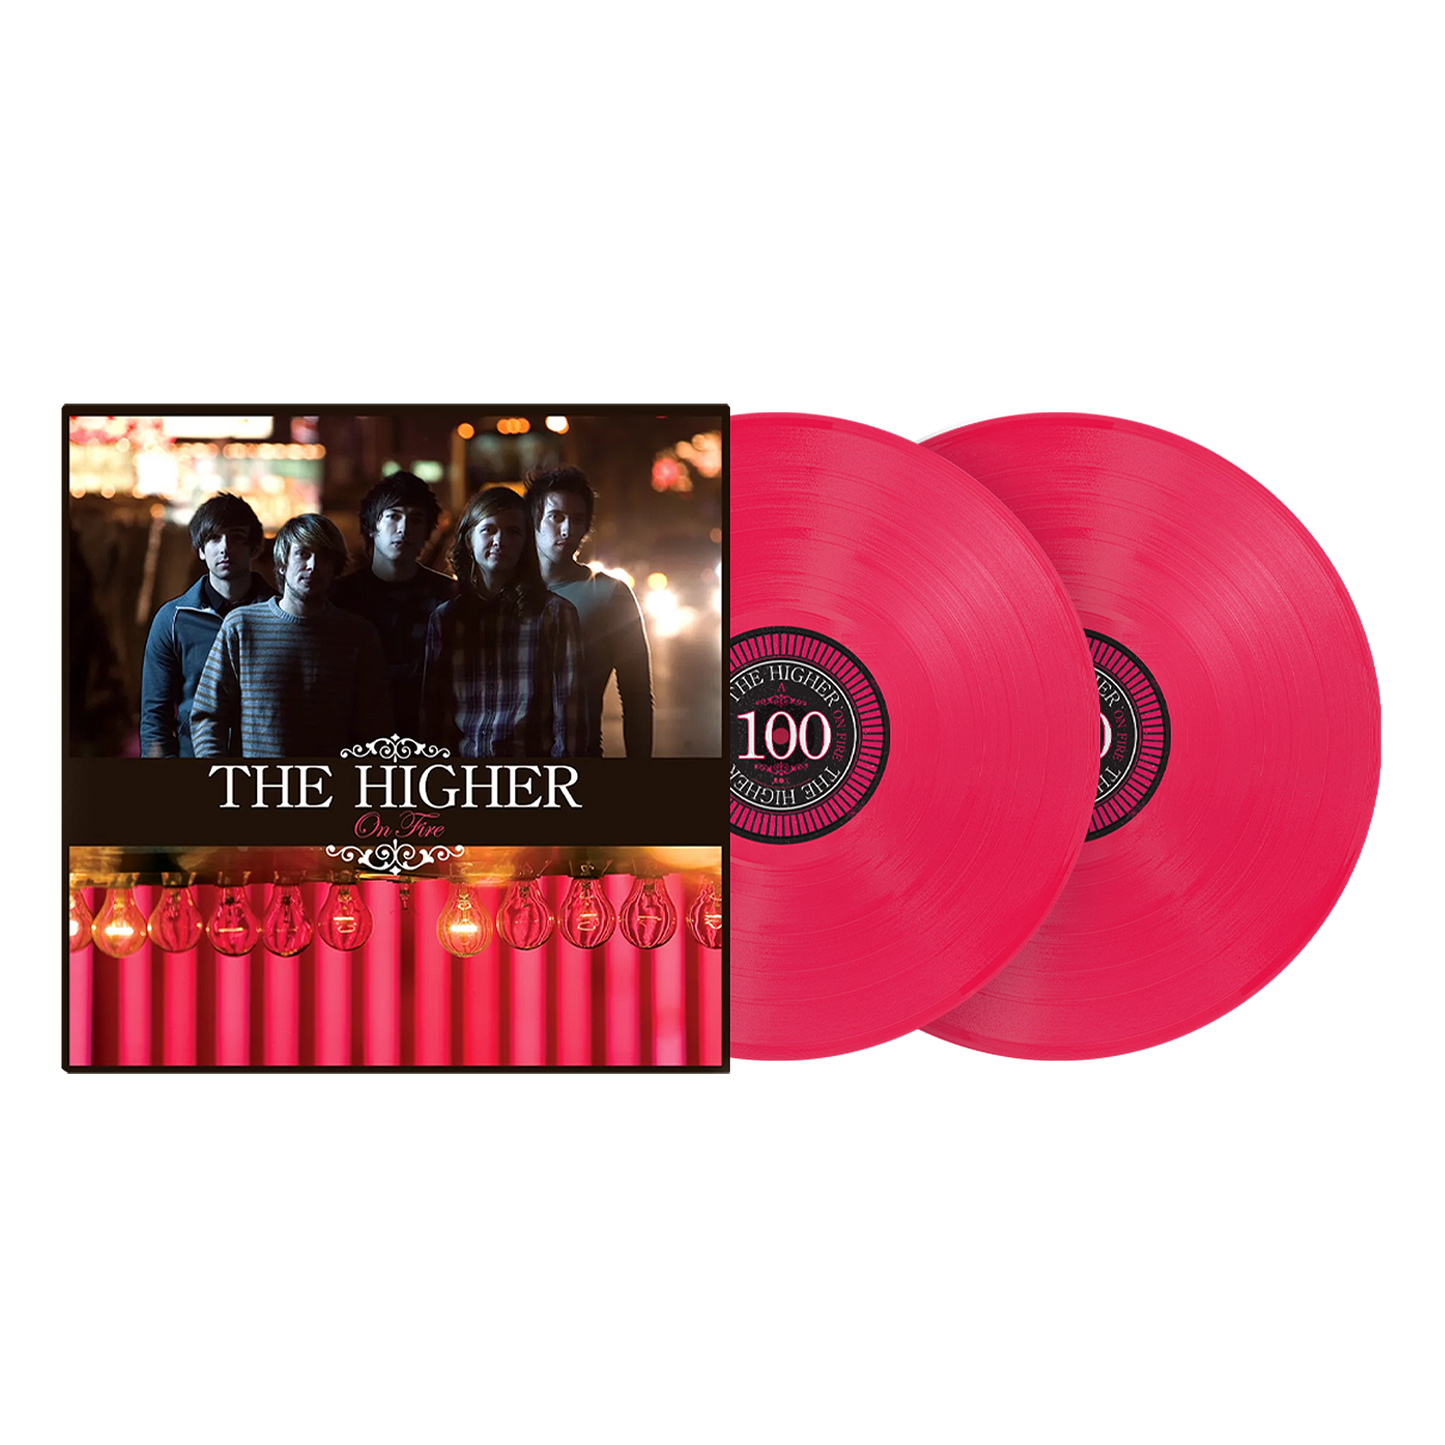 The Higher - "On Fire"